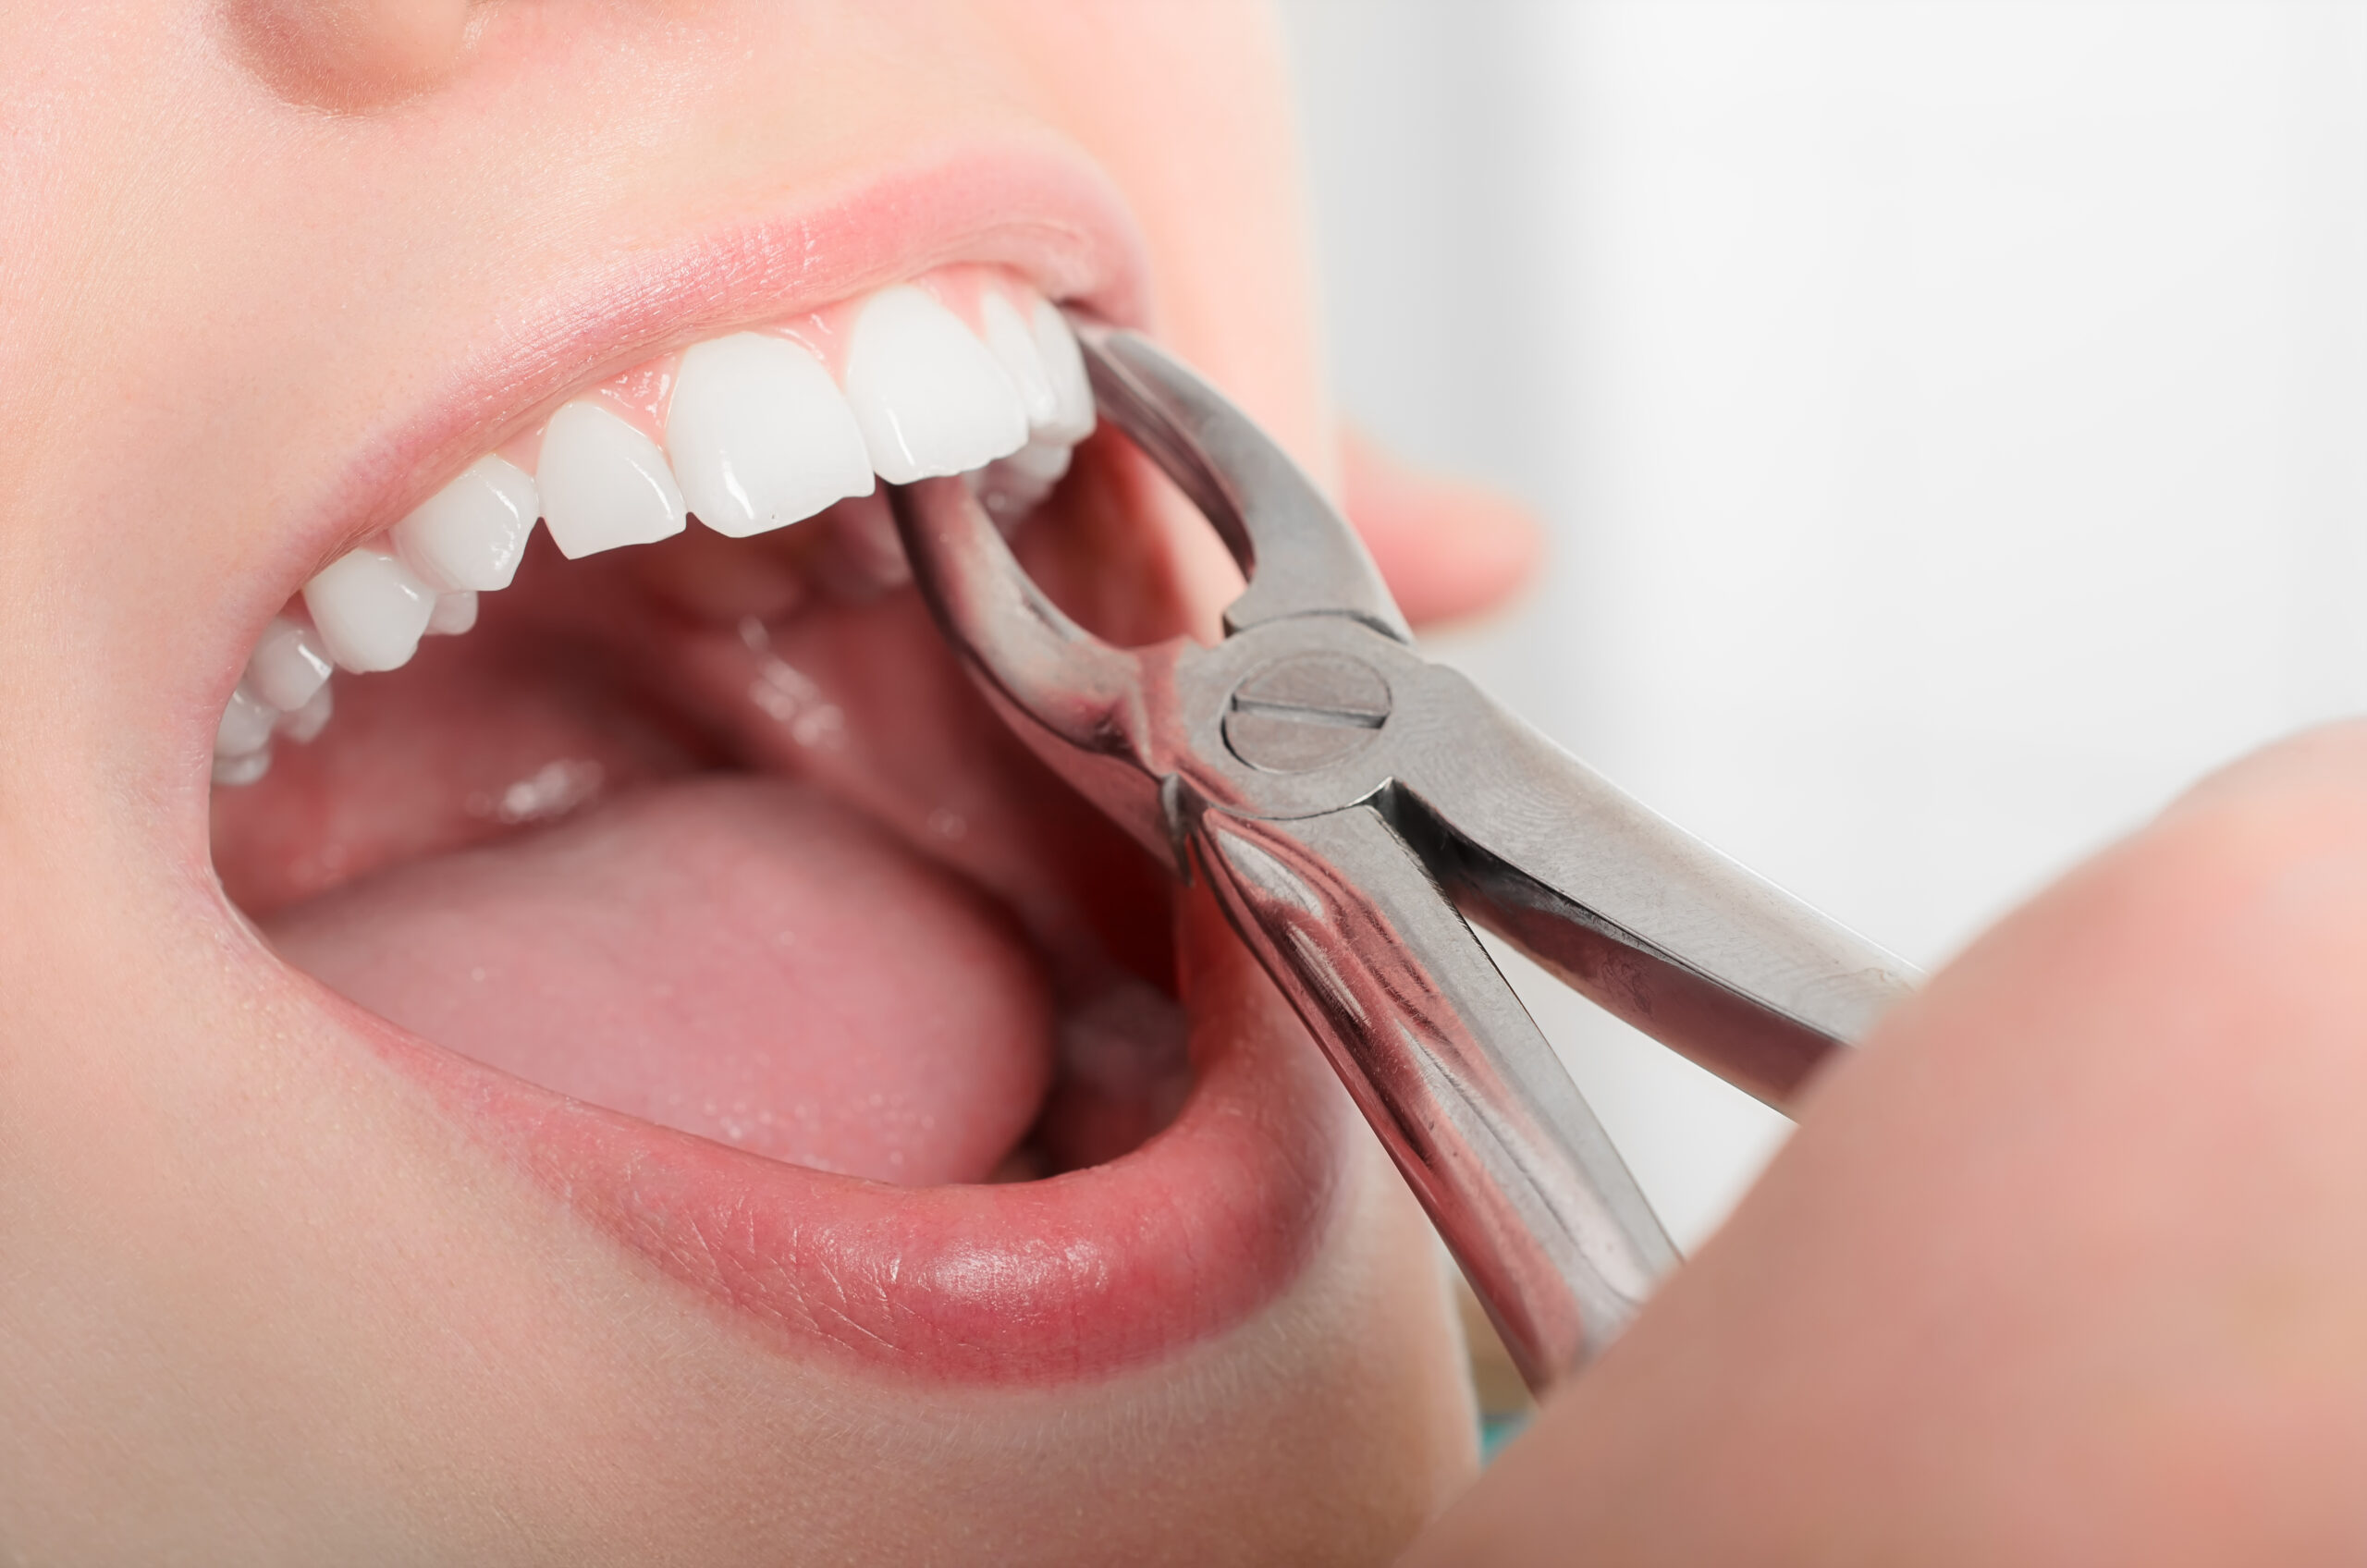 an image of a tooth extraction.